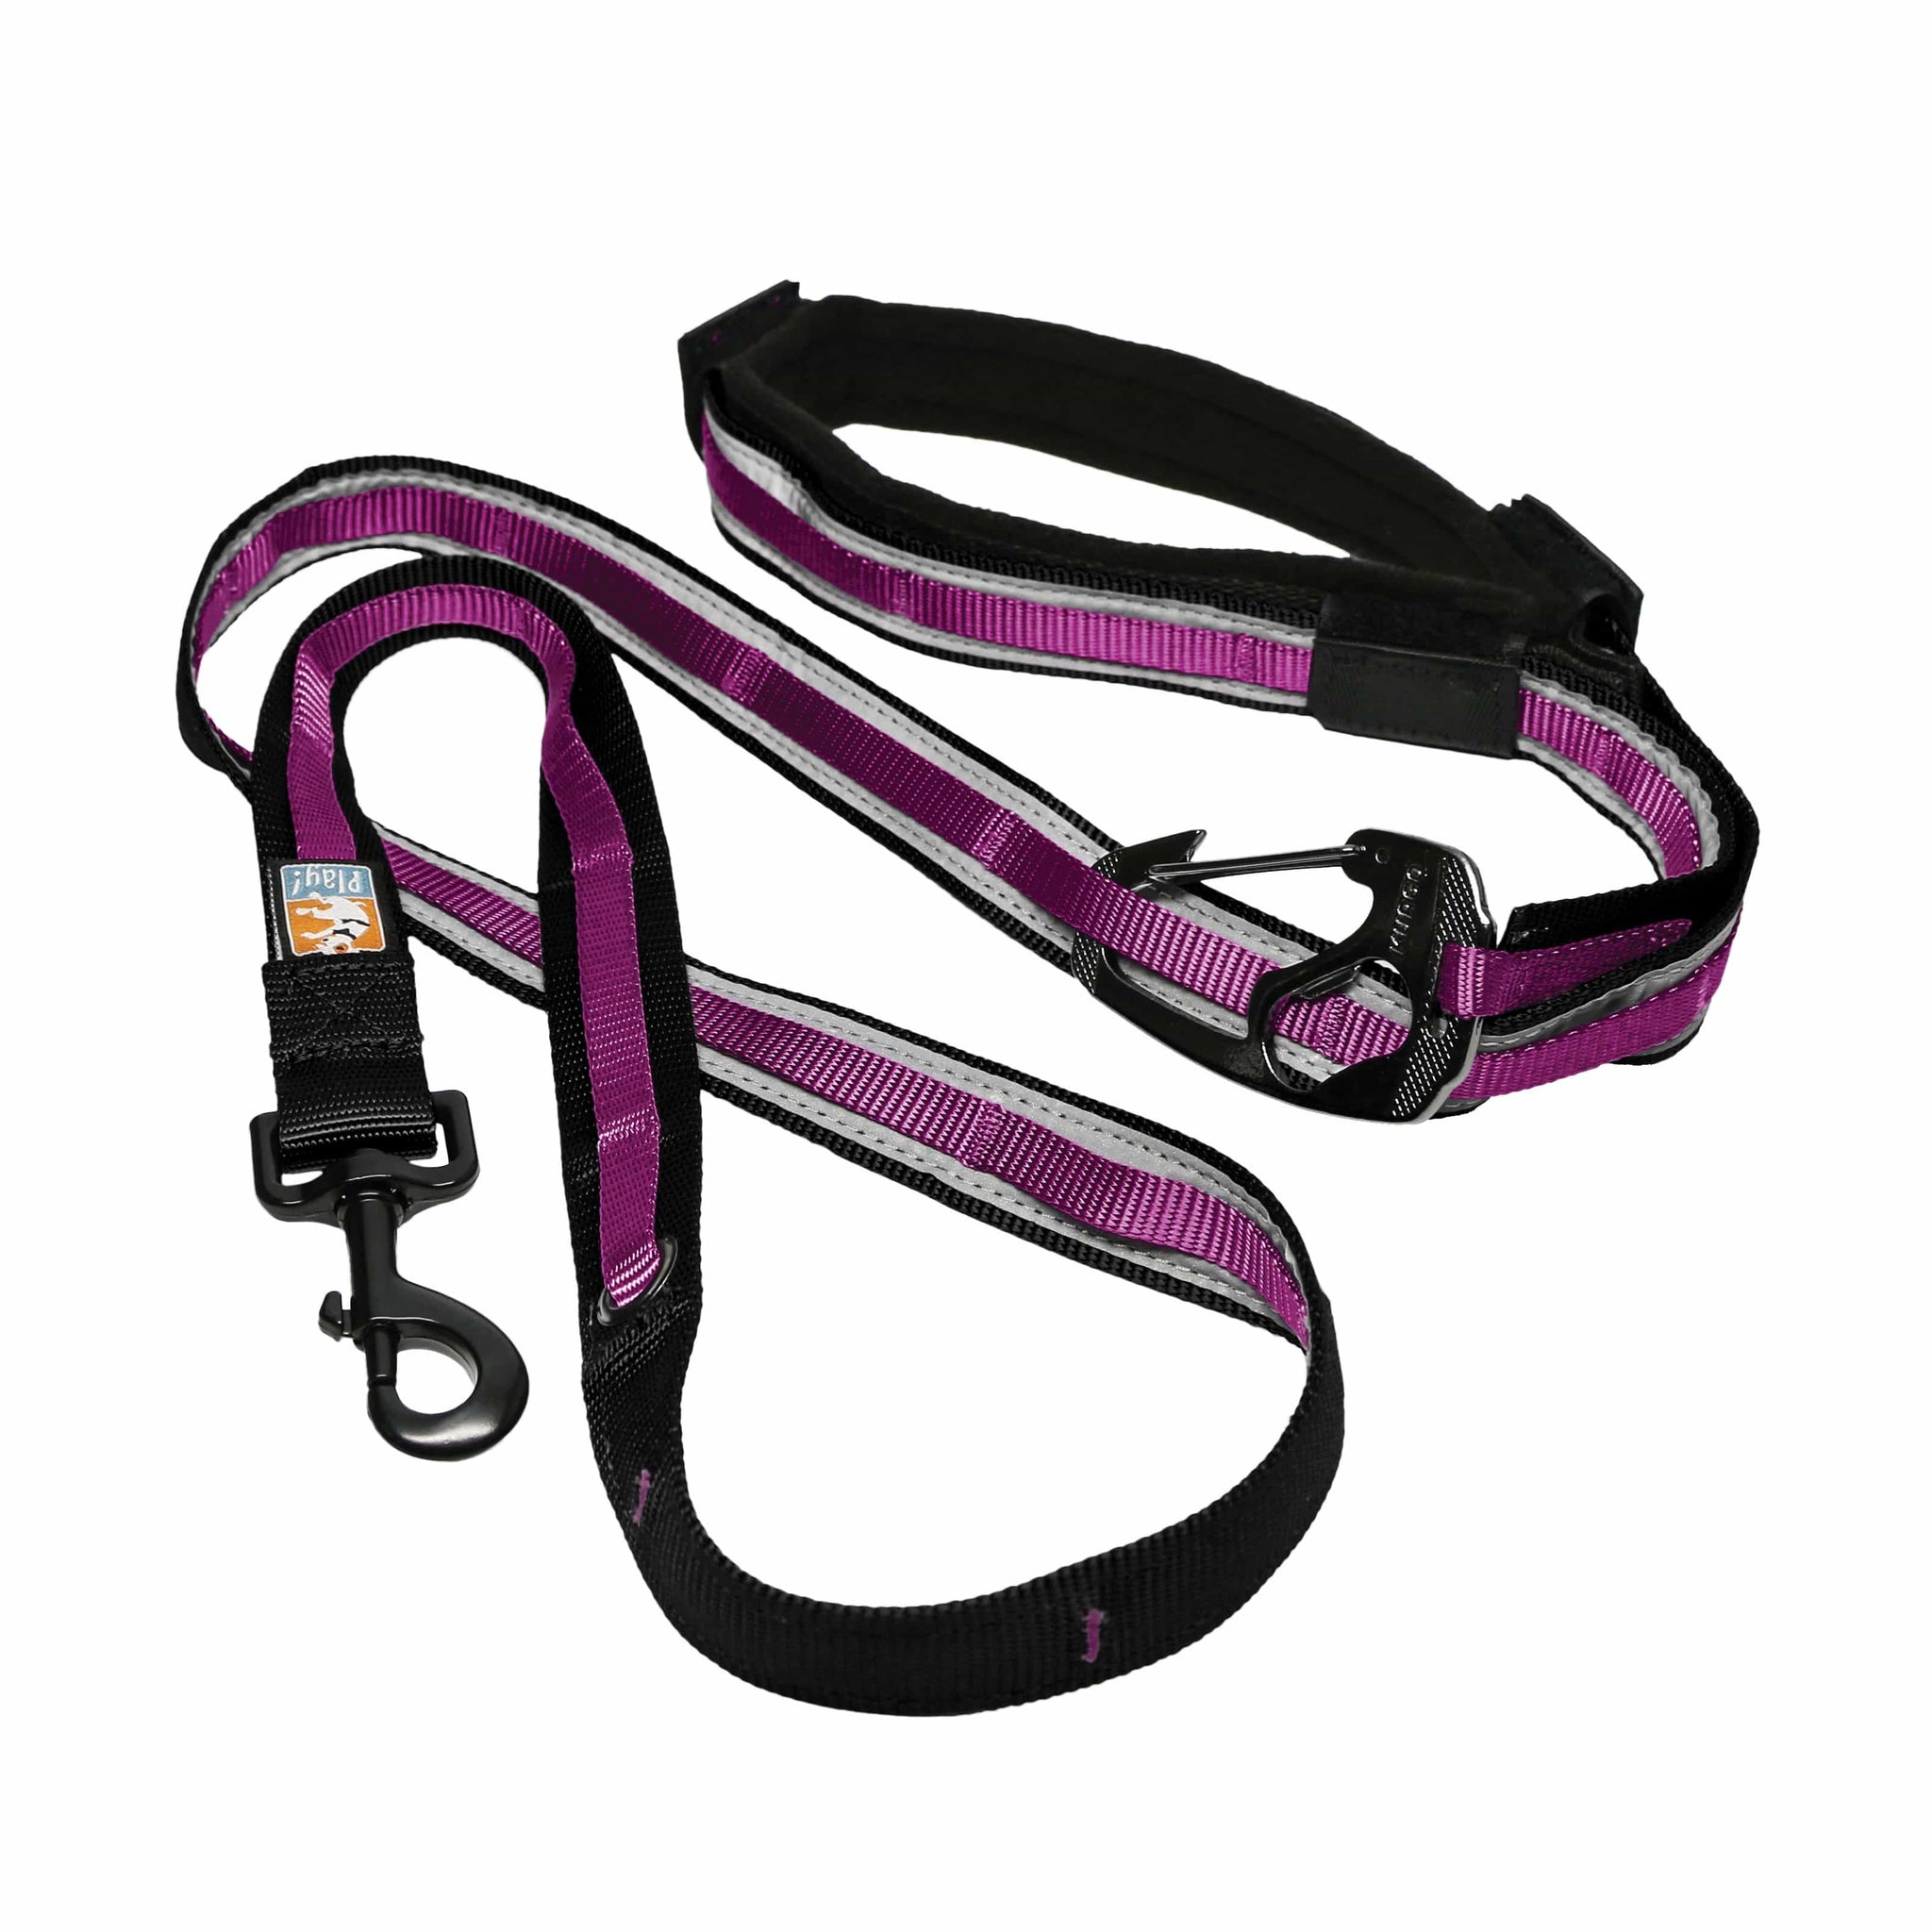 The 6 in 1 Quantum Leash  in purple showing the adjustment and securing clips.